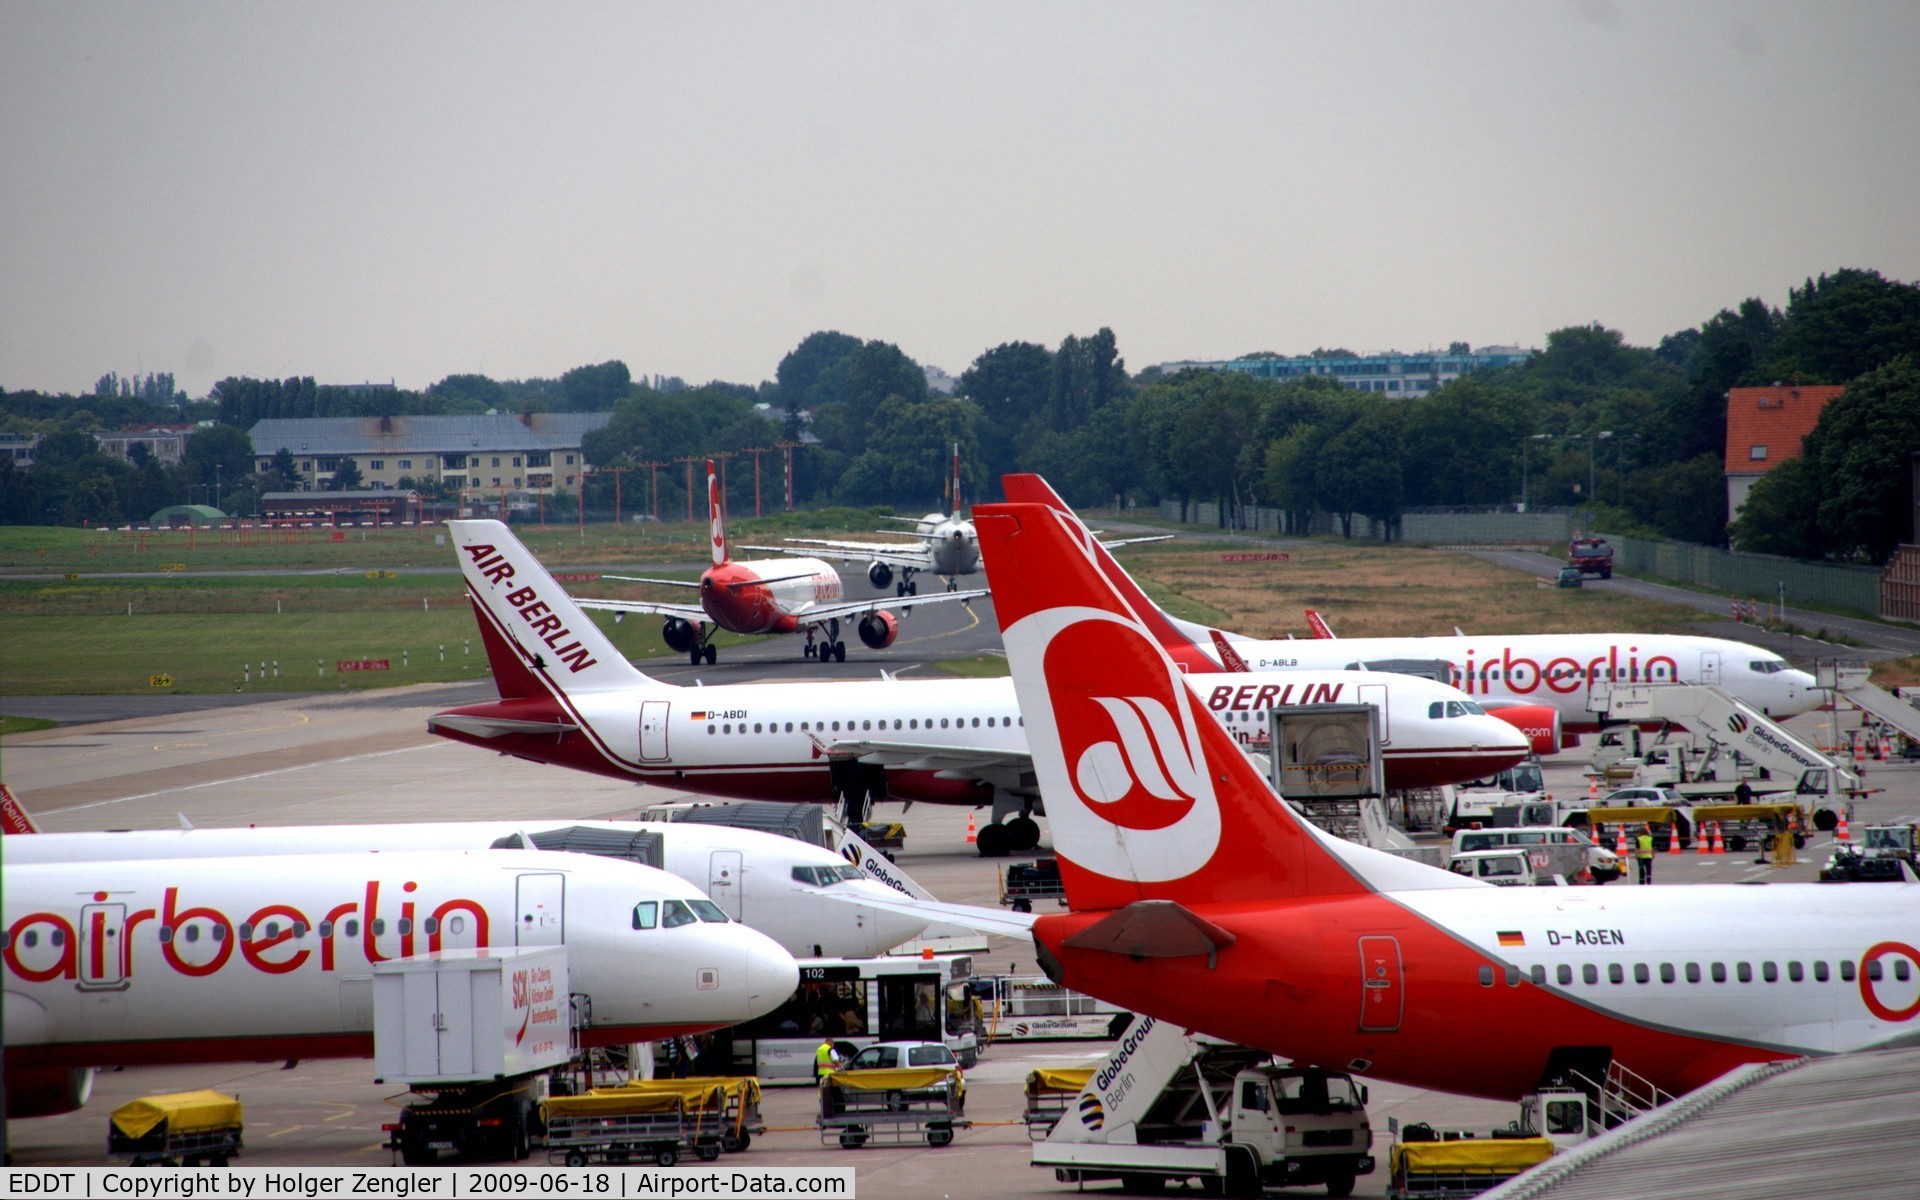 Tegel International Airport (closing in 2011), Berlin Germany (EDDT) - Rush hour in red and white on AIR BERLIN´s home base